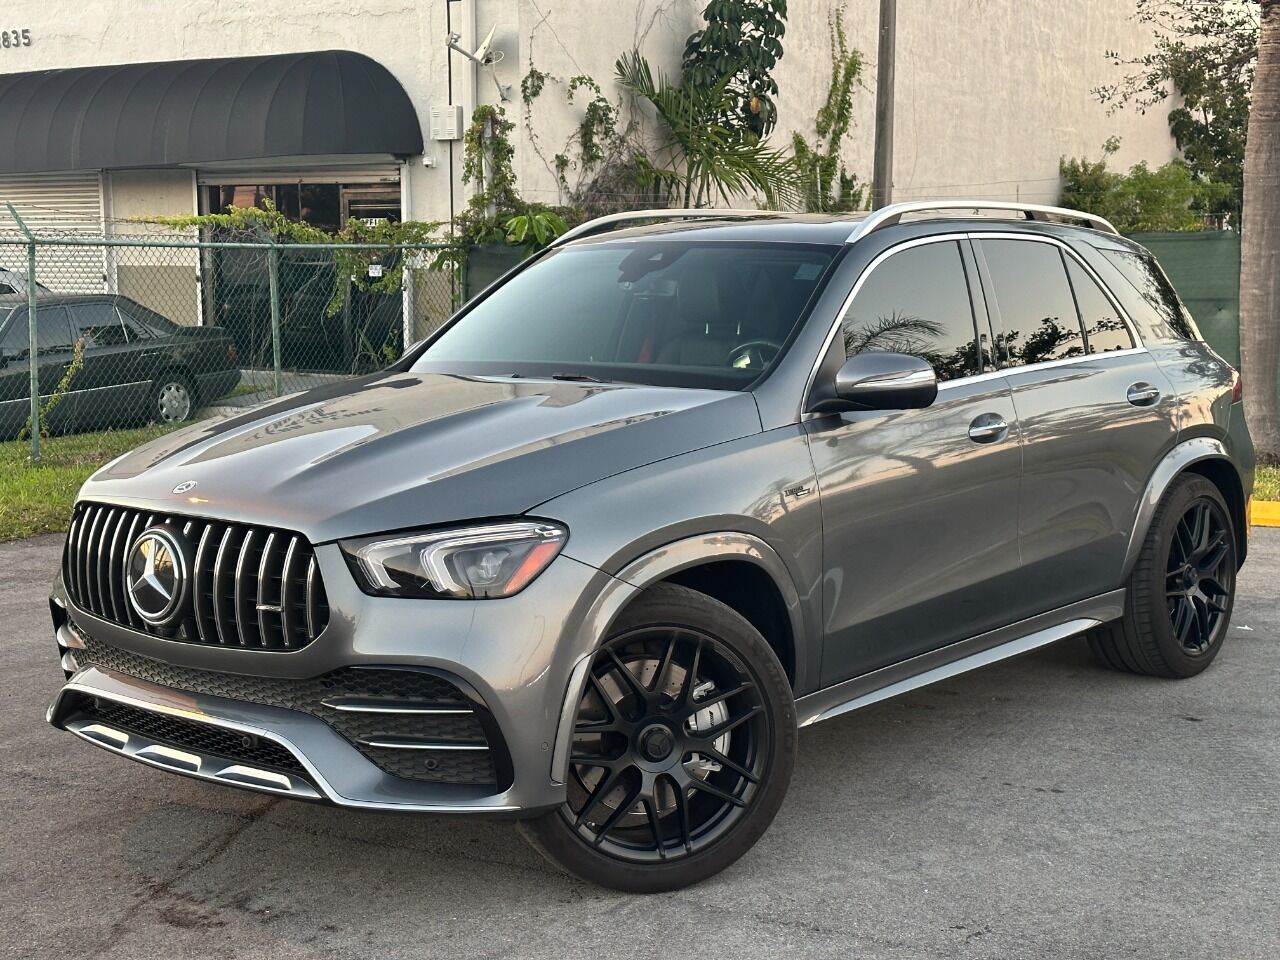 2022 MERCEDES-BENZ GLE-Class SUV / Crossover - $79,900